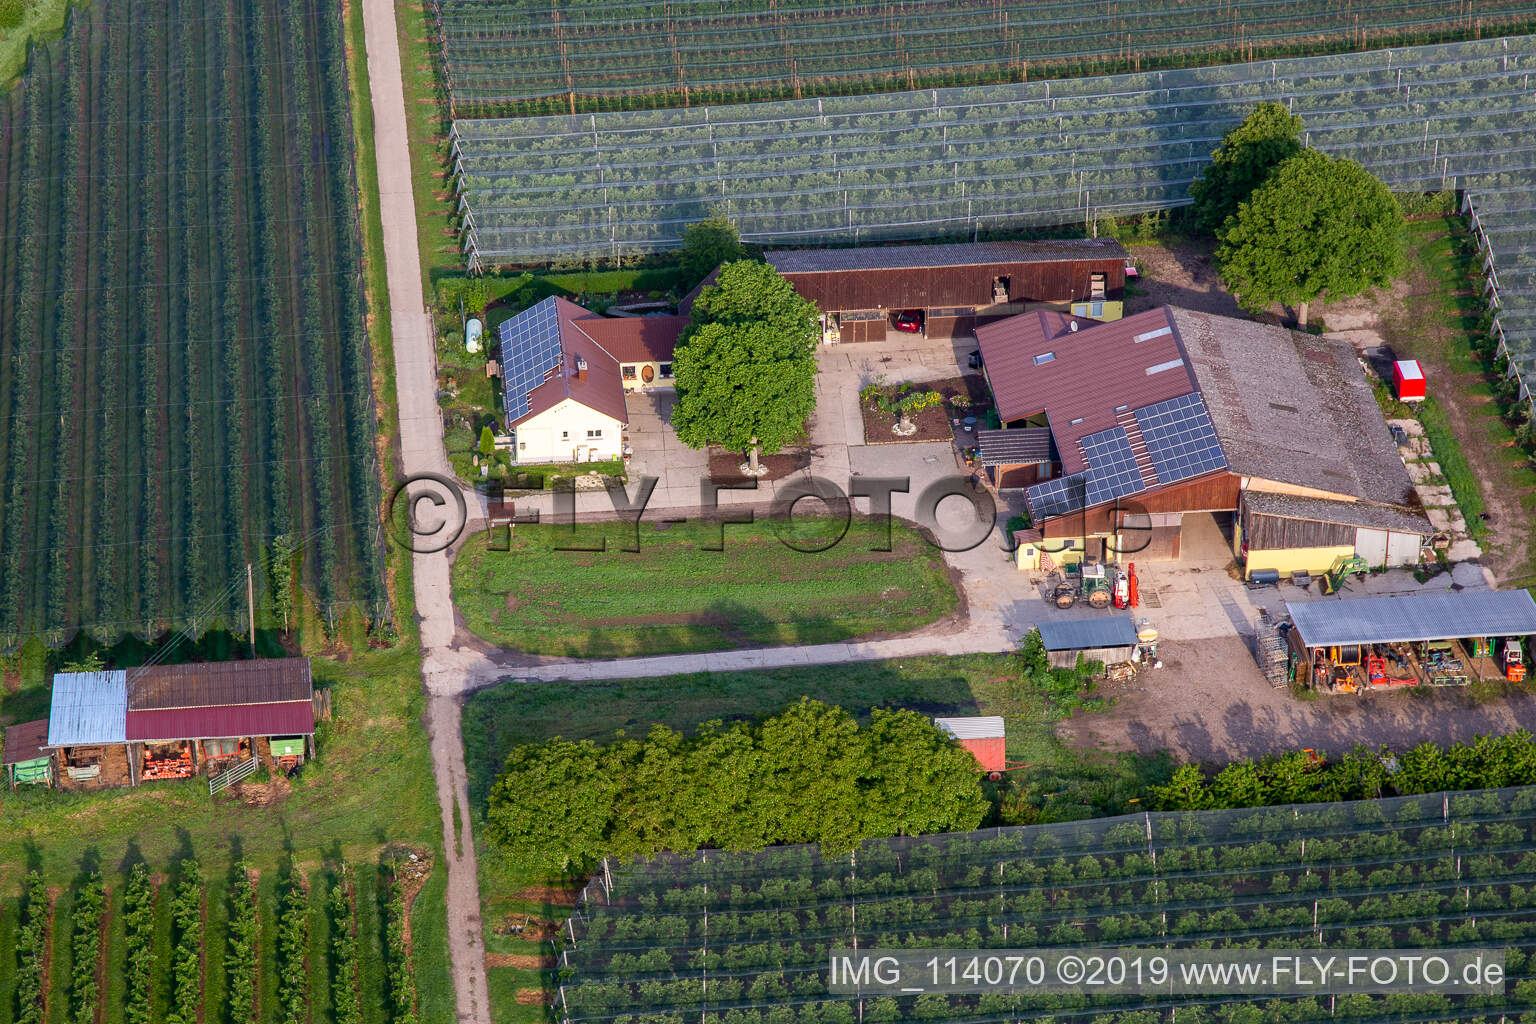 Oblique view of Gensheimer fruit and spagel farm in Steinweiler in the state Rhineland-Palatinate, Germany